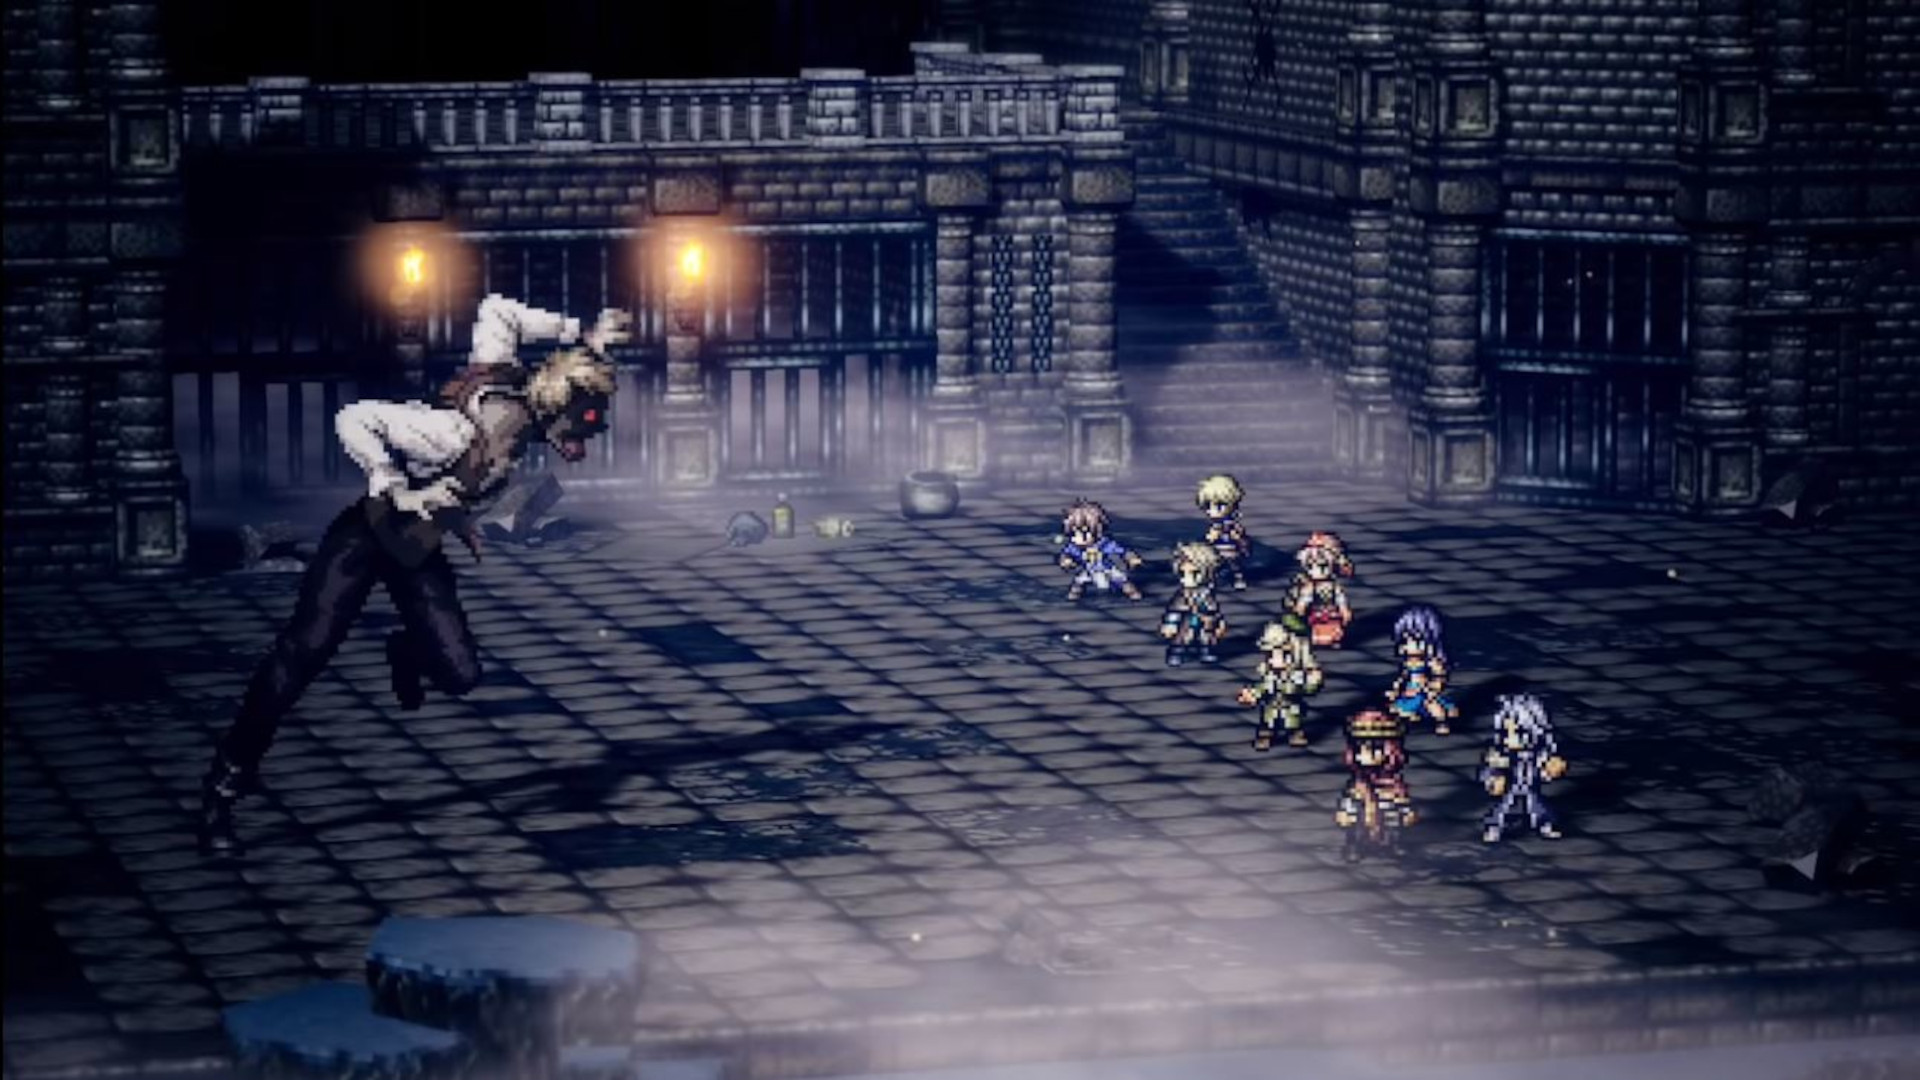 Octopath Traveler: Champions of the Continent now available on